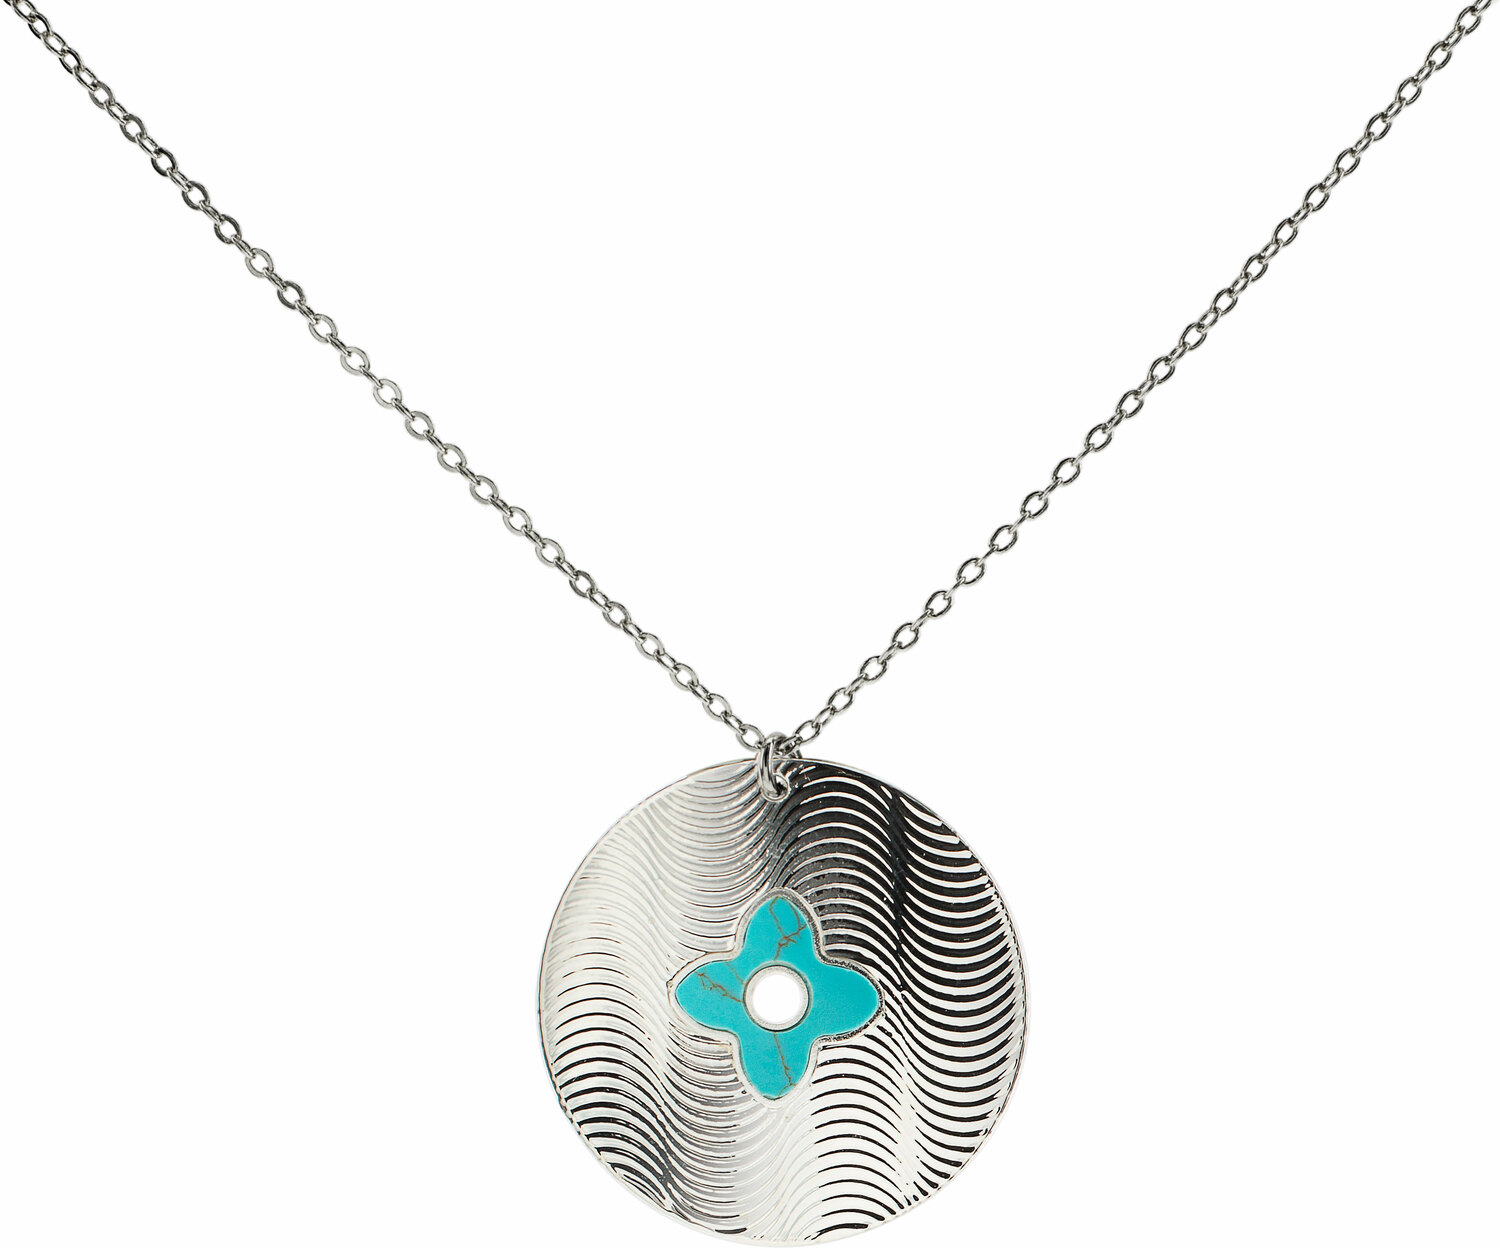 Silver Shield by H2Z Filigree Jewelry - Silver Shield - Turquoise Necklace